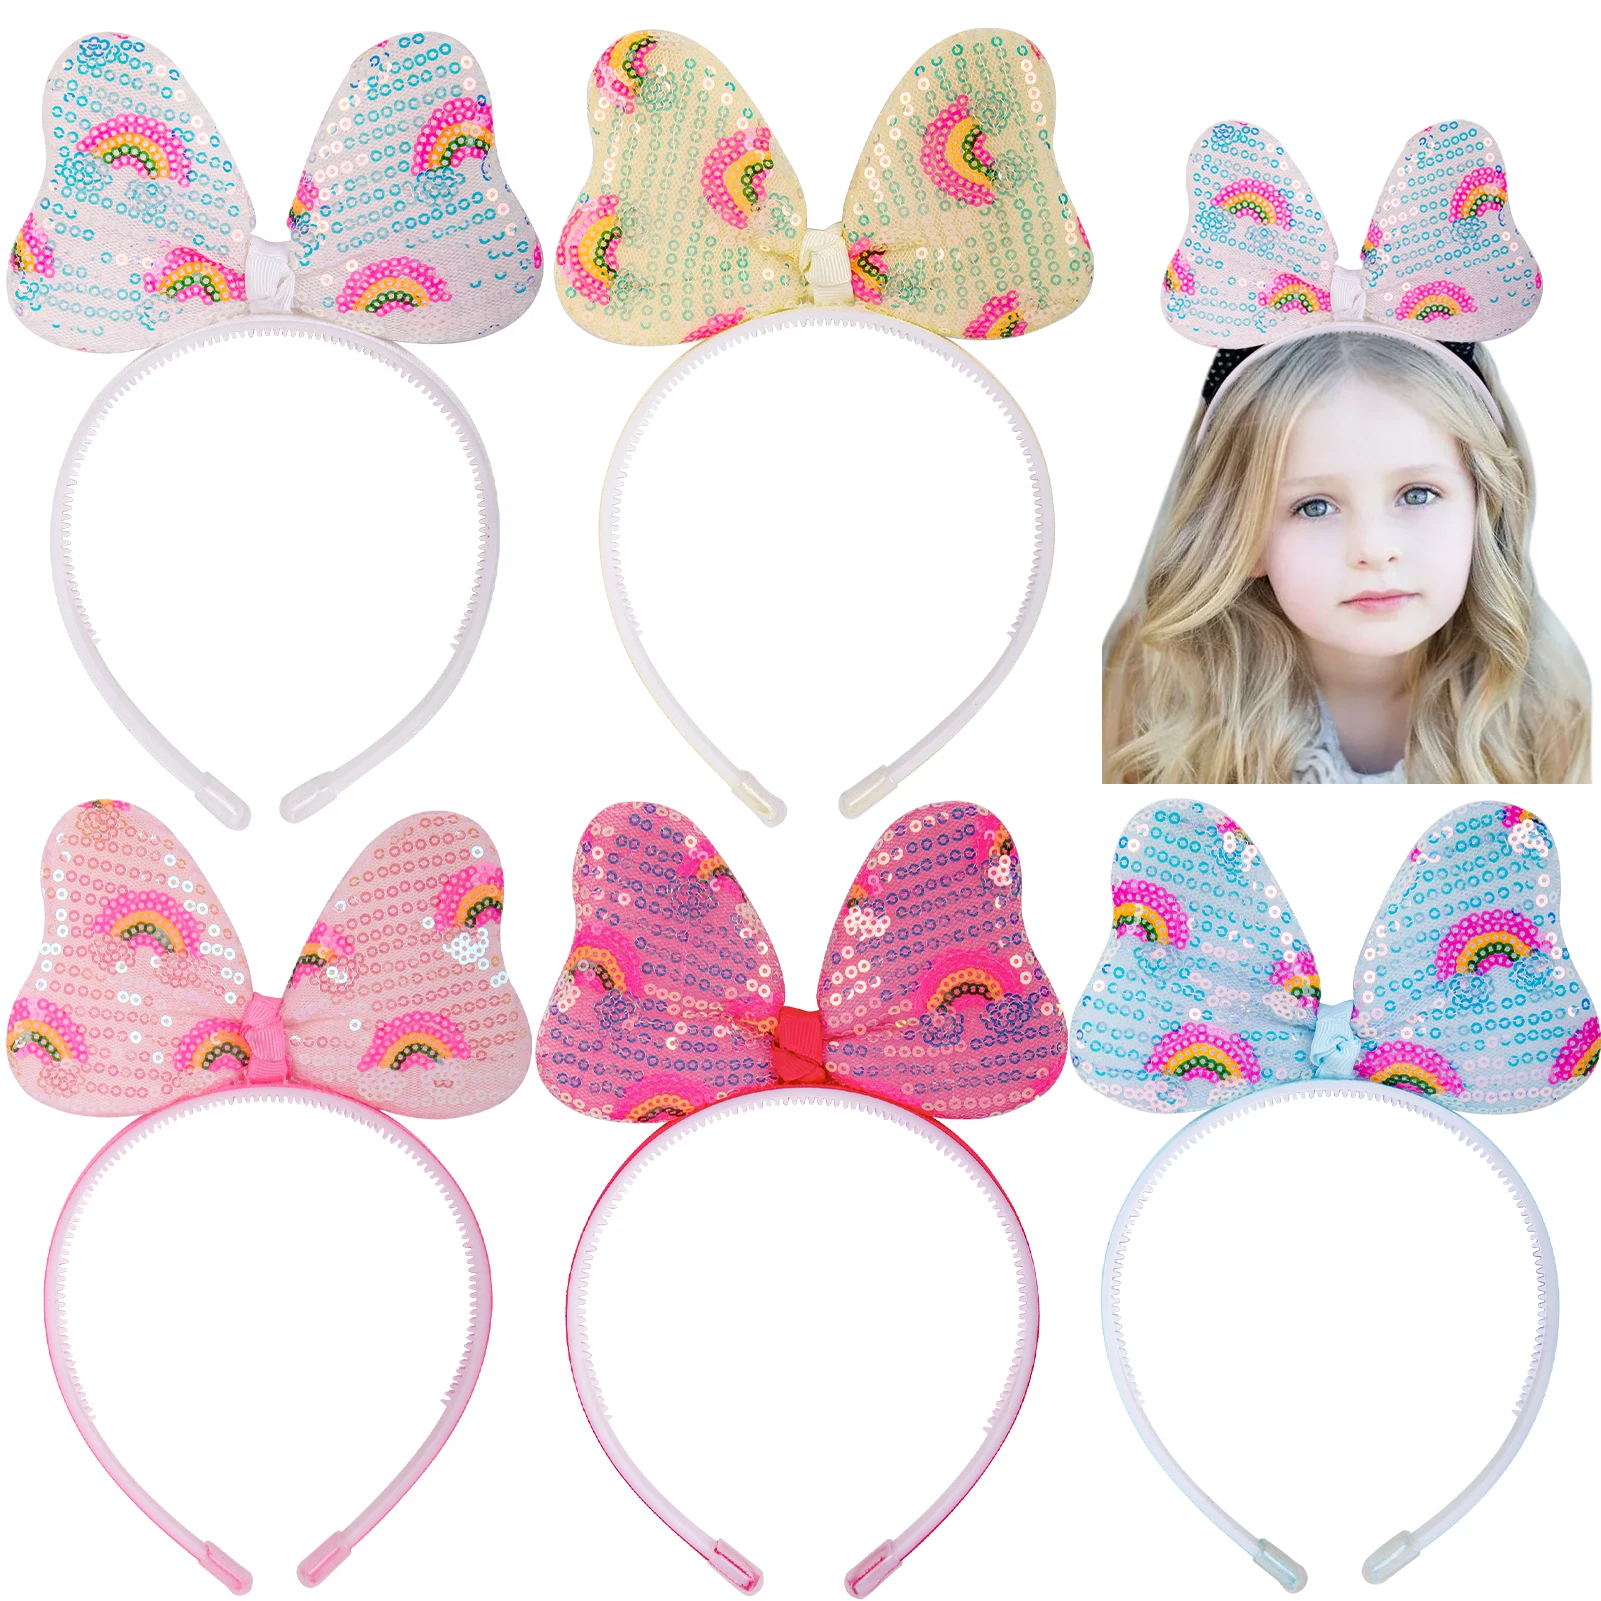 

Candygirl Children Cute Party Hair Bands Sequins Hairbands Girls Bow Headbands Kids Festival Play Hair Accessories طوق شعر بنات